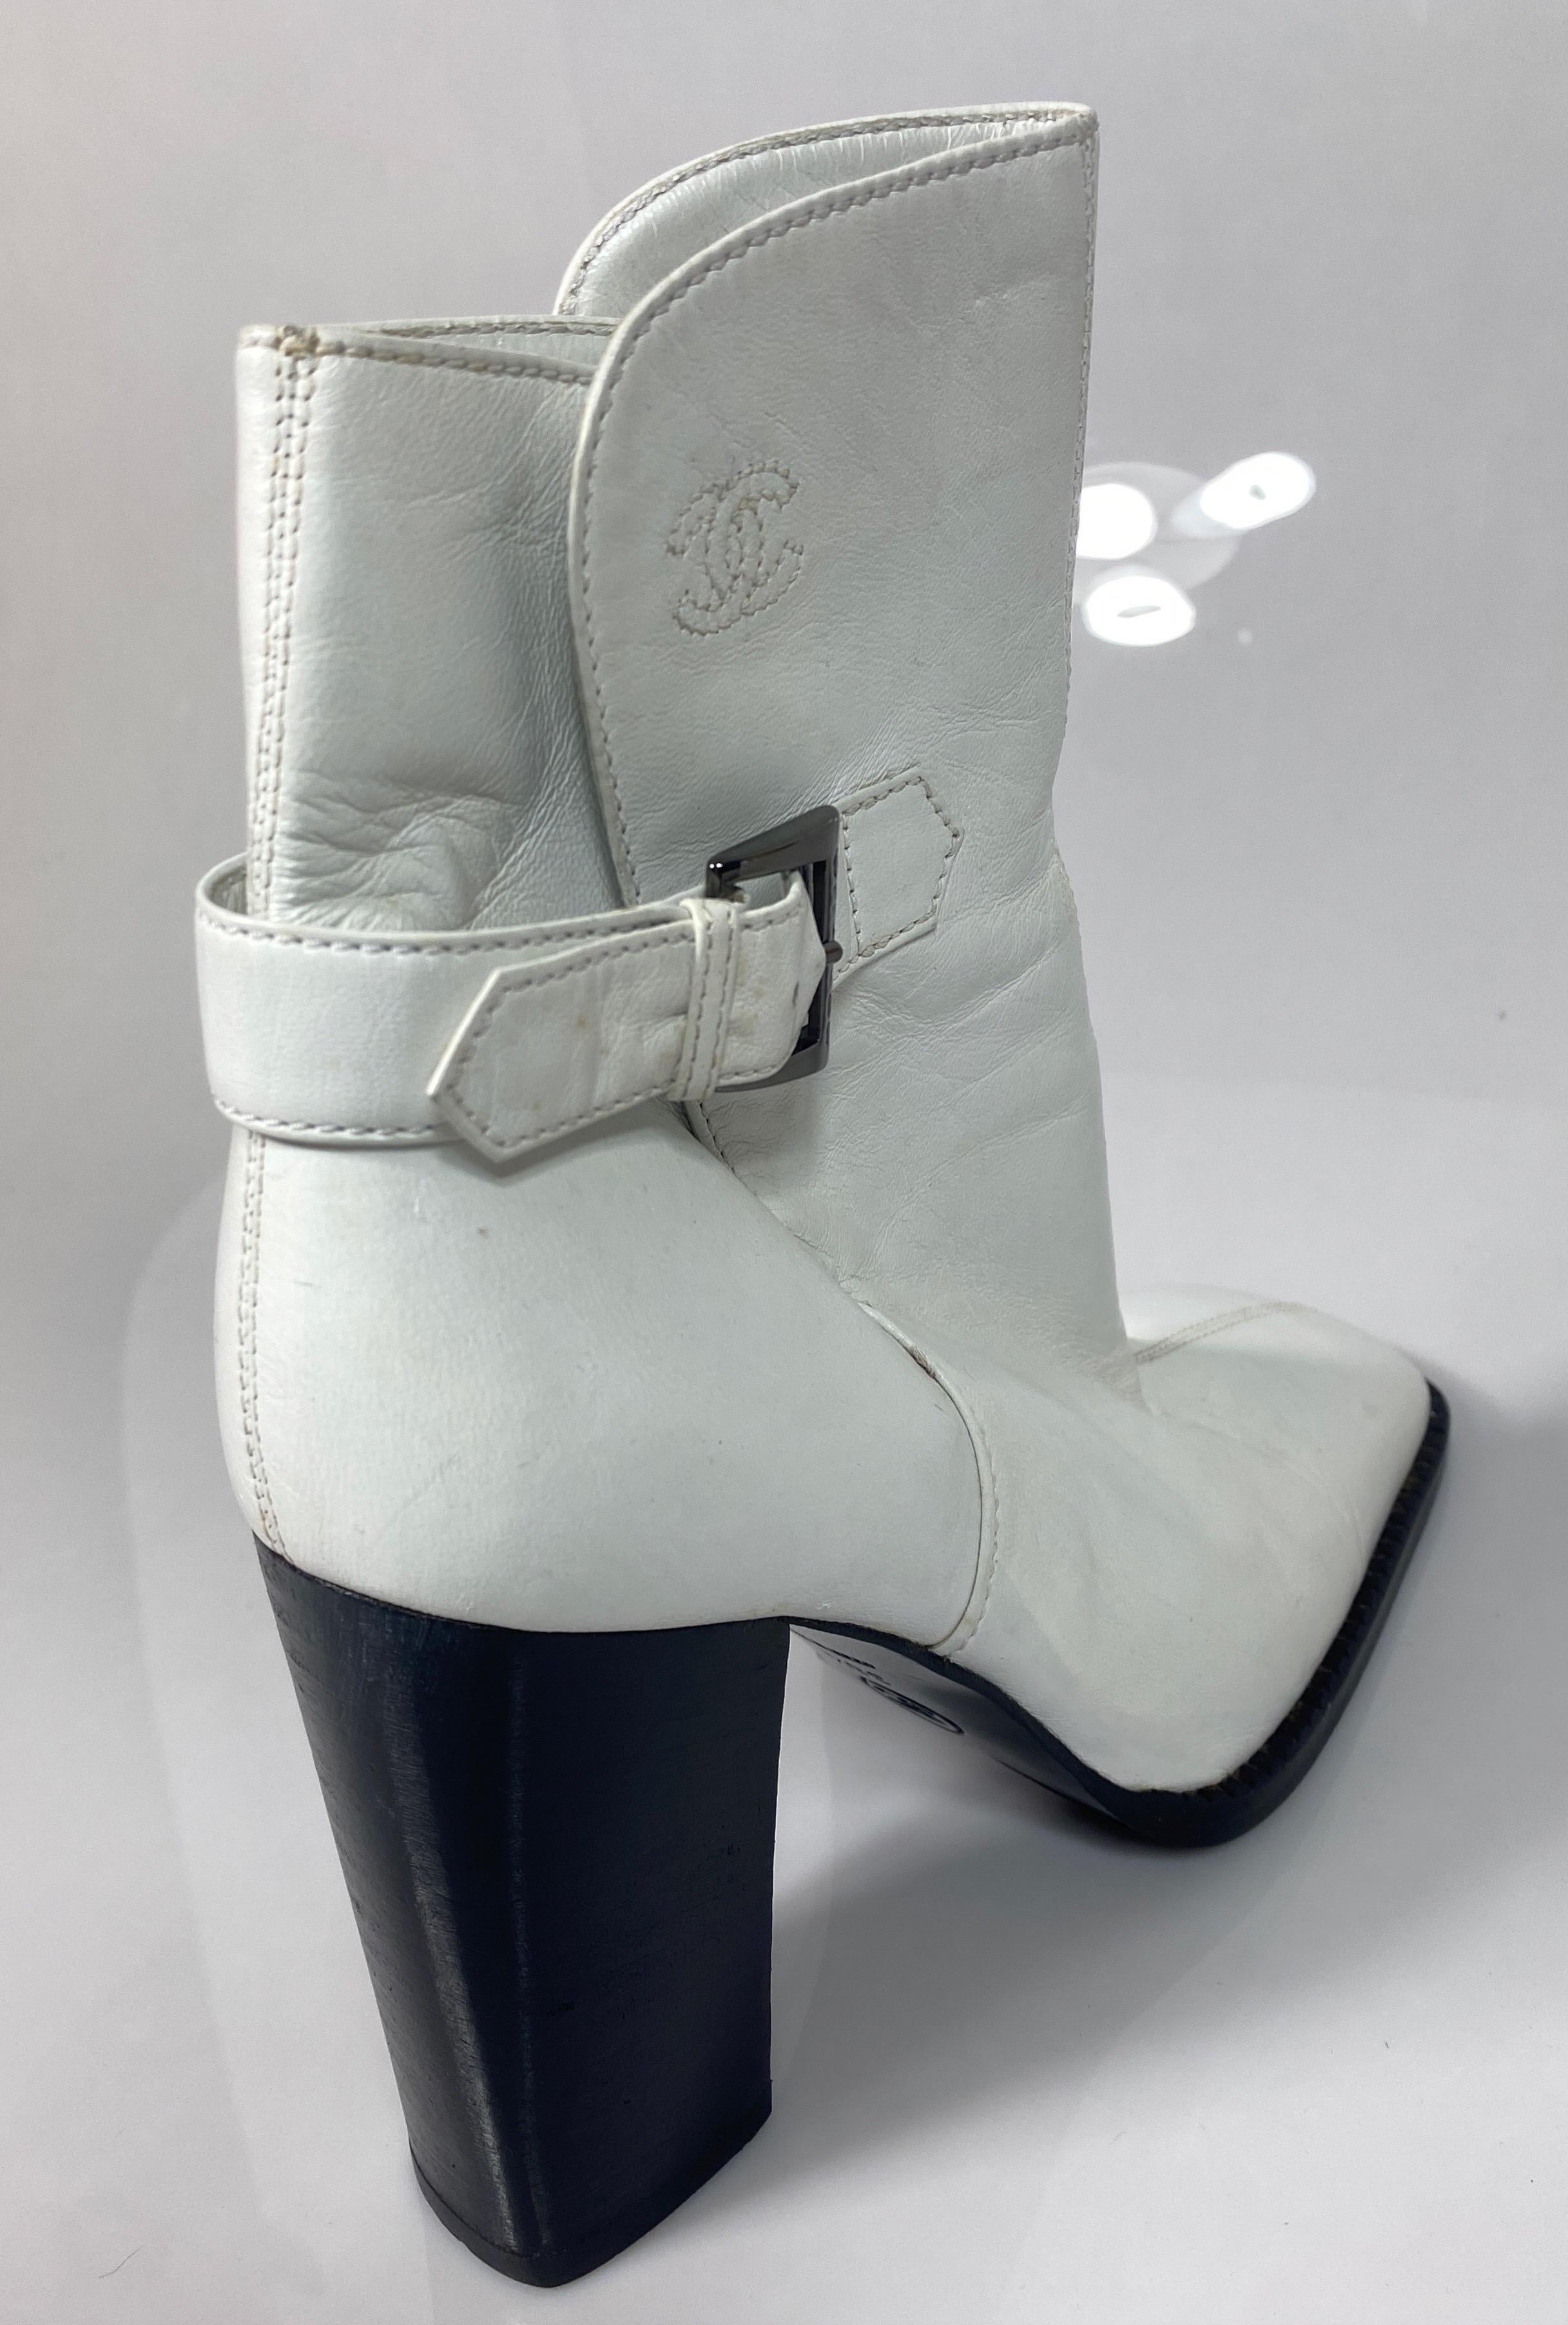 Chanel White Leather Chunky Wood Stack Heel Short Boot -Size 36.5 For Sale 2